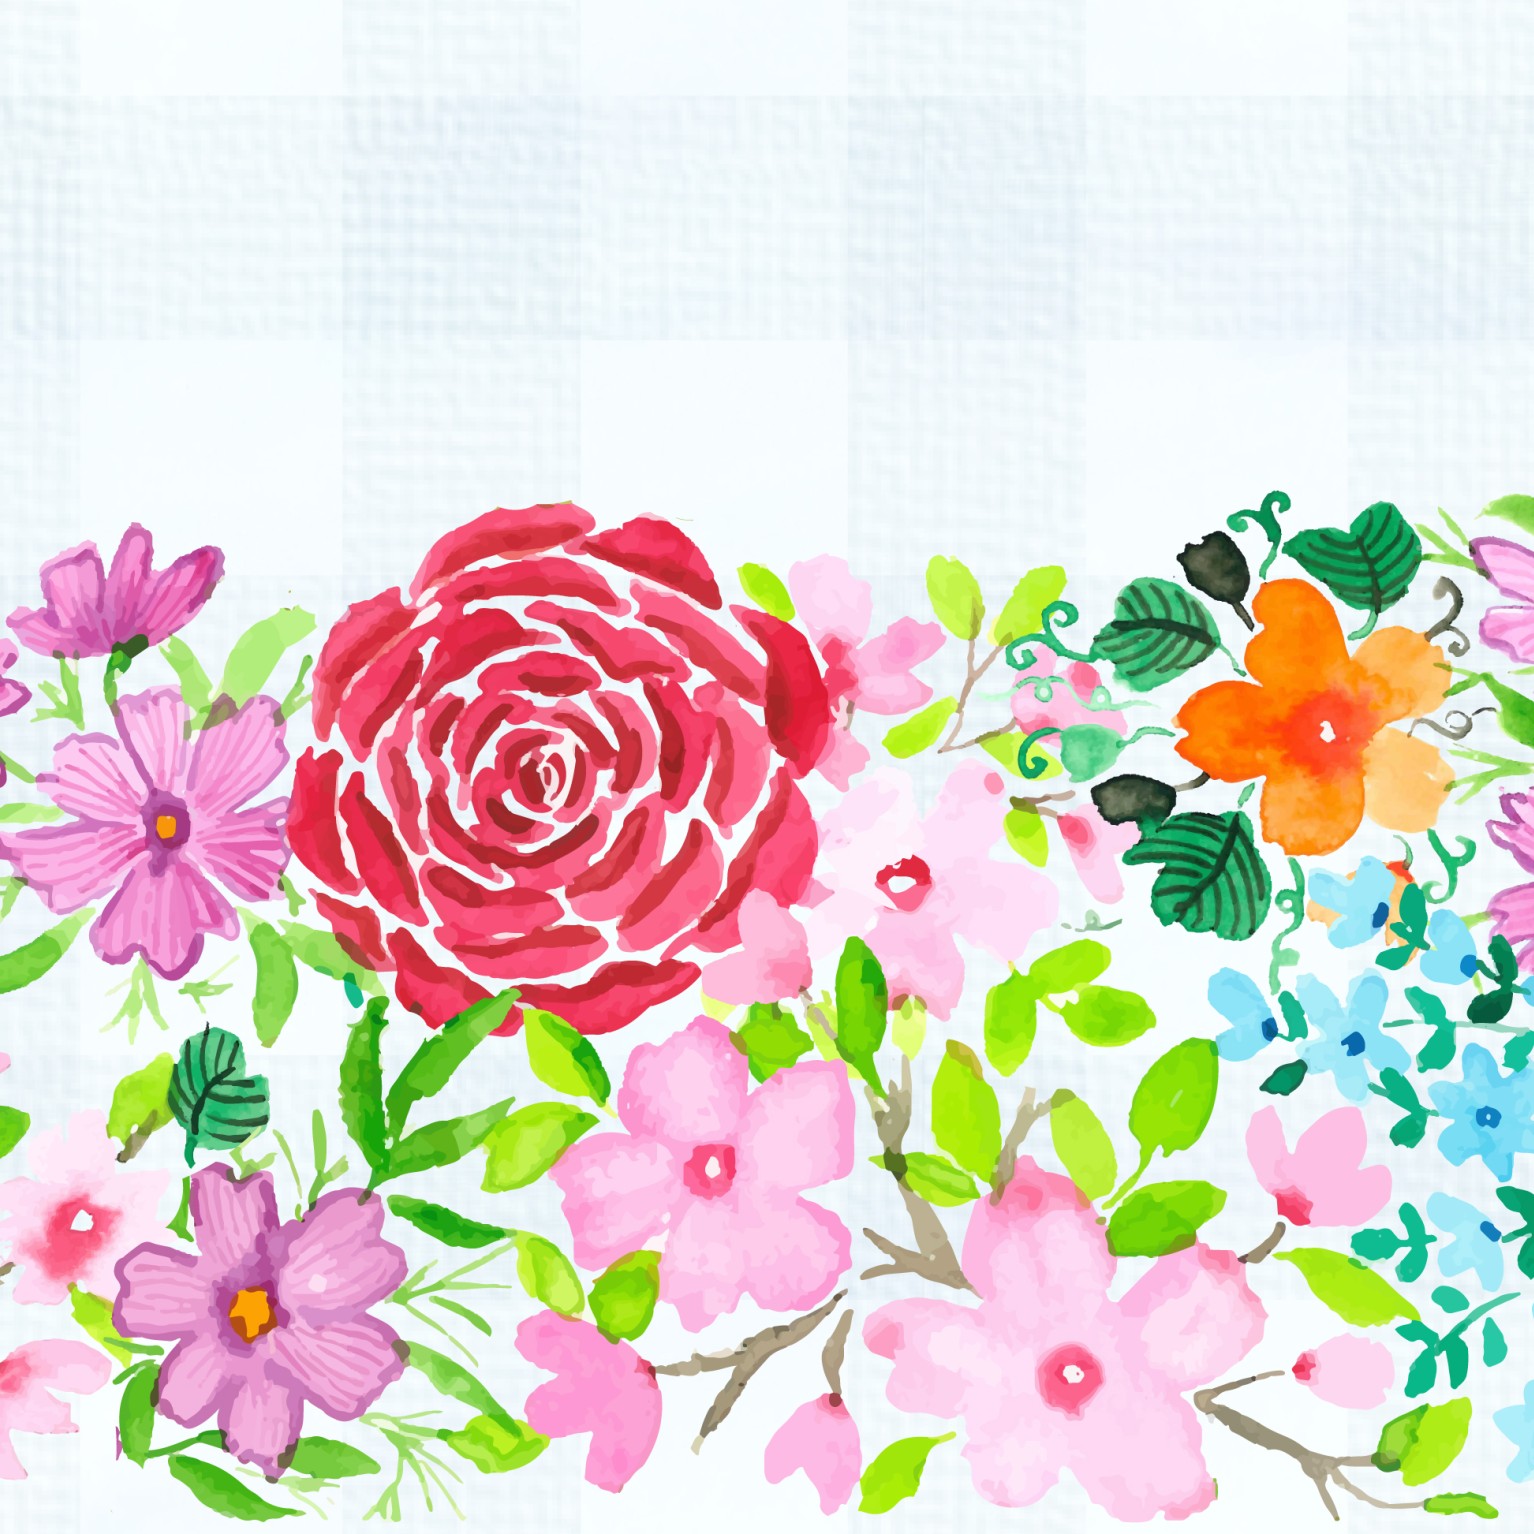 A colorful array of watercolor flowers with a pale teal-toned gingham-like background of overlapping strips.